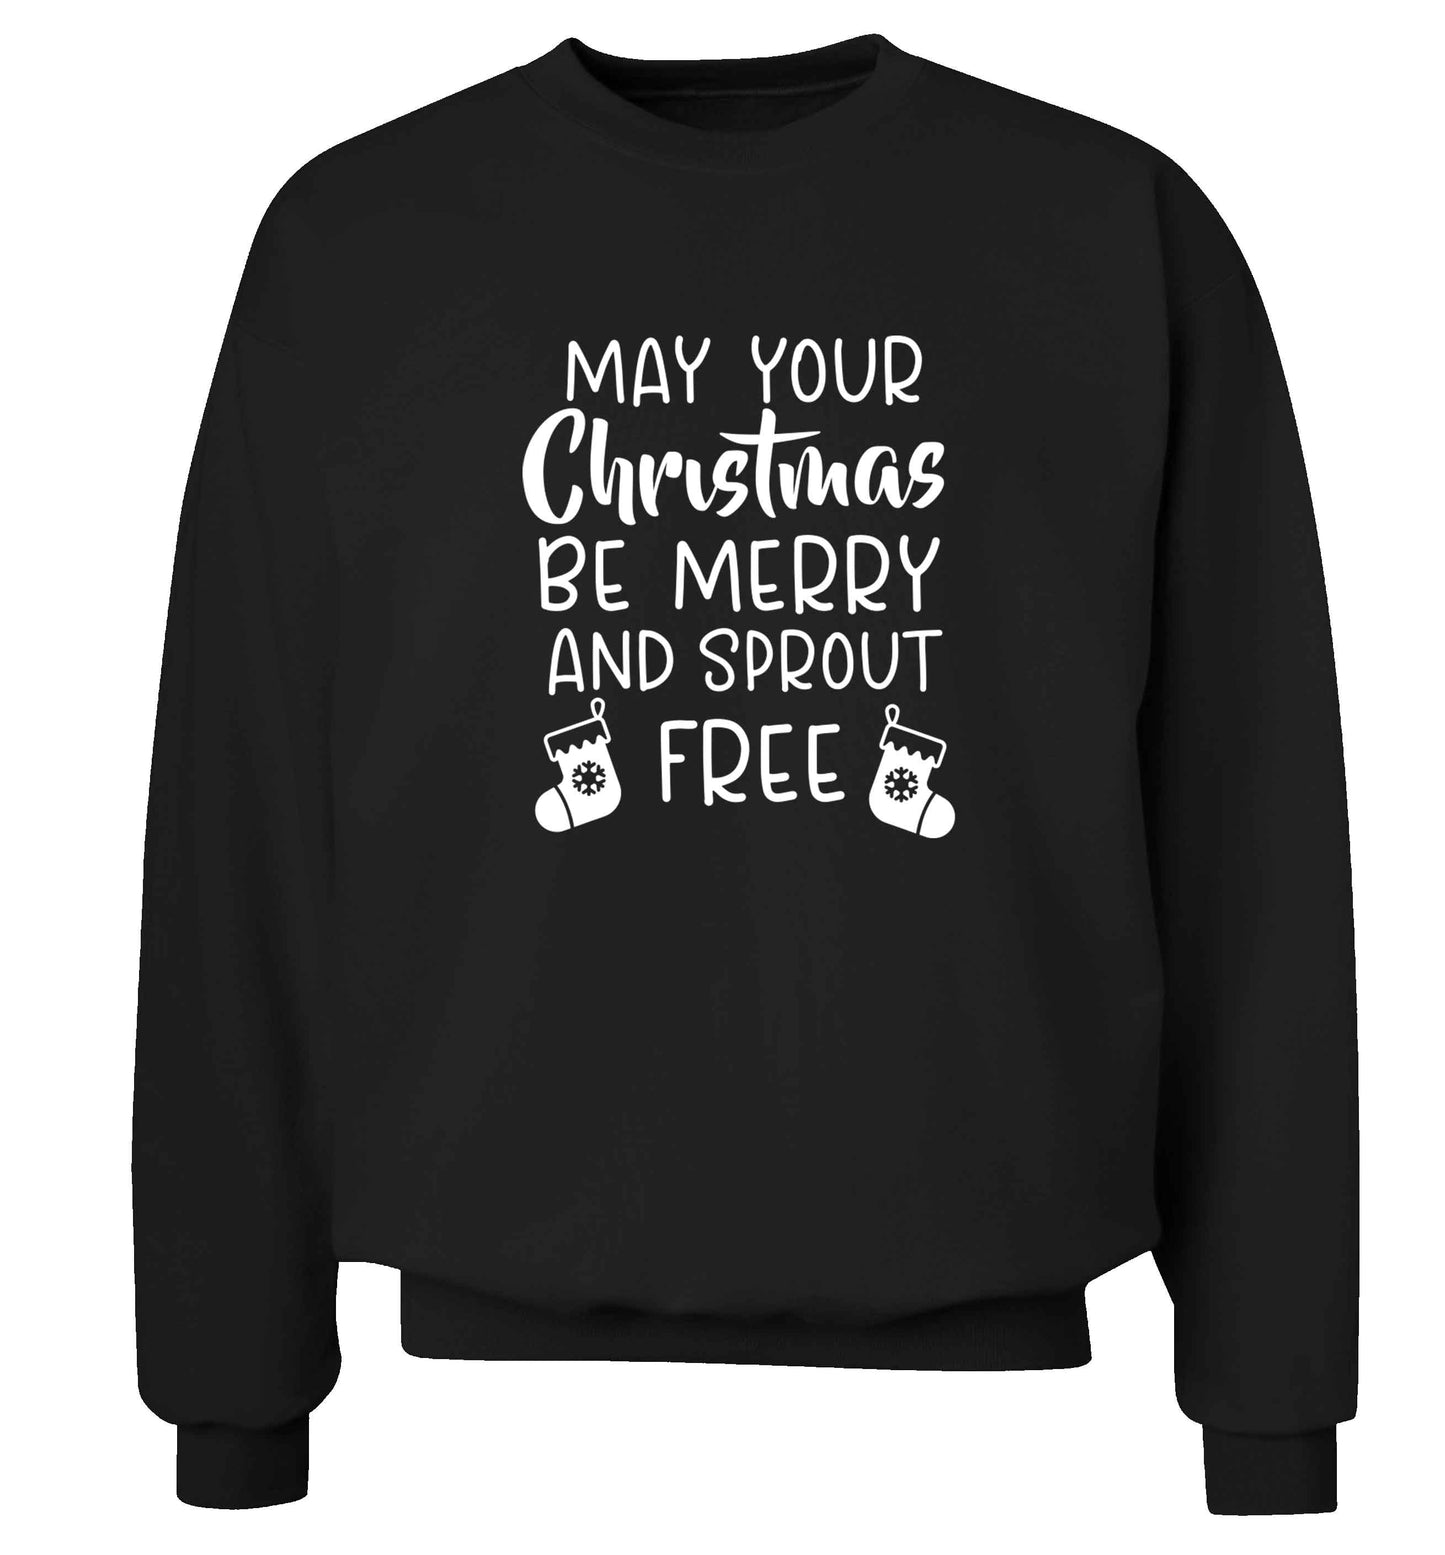 May your Christmas be merry and sprout free adult's unisex black sweater 2XL